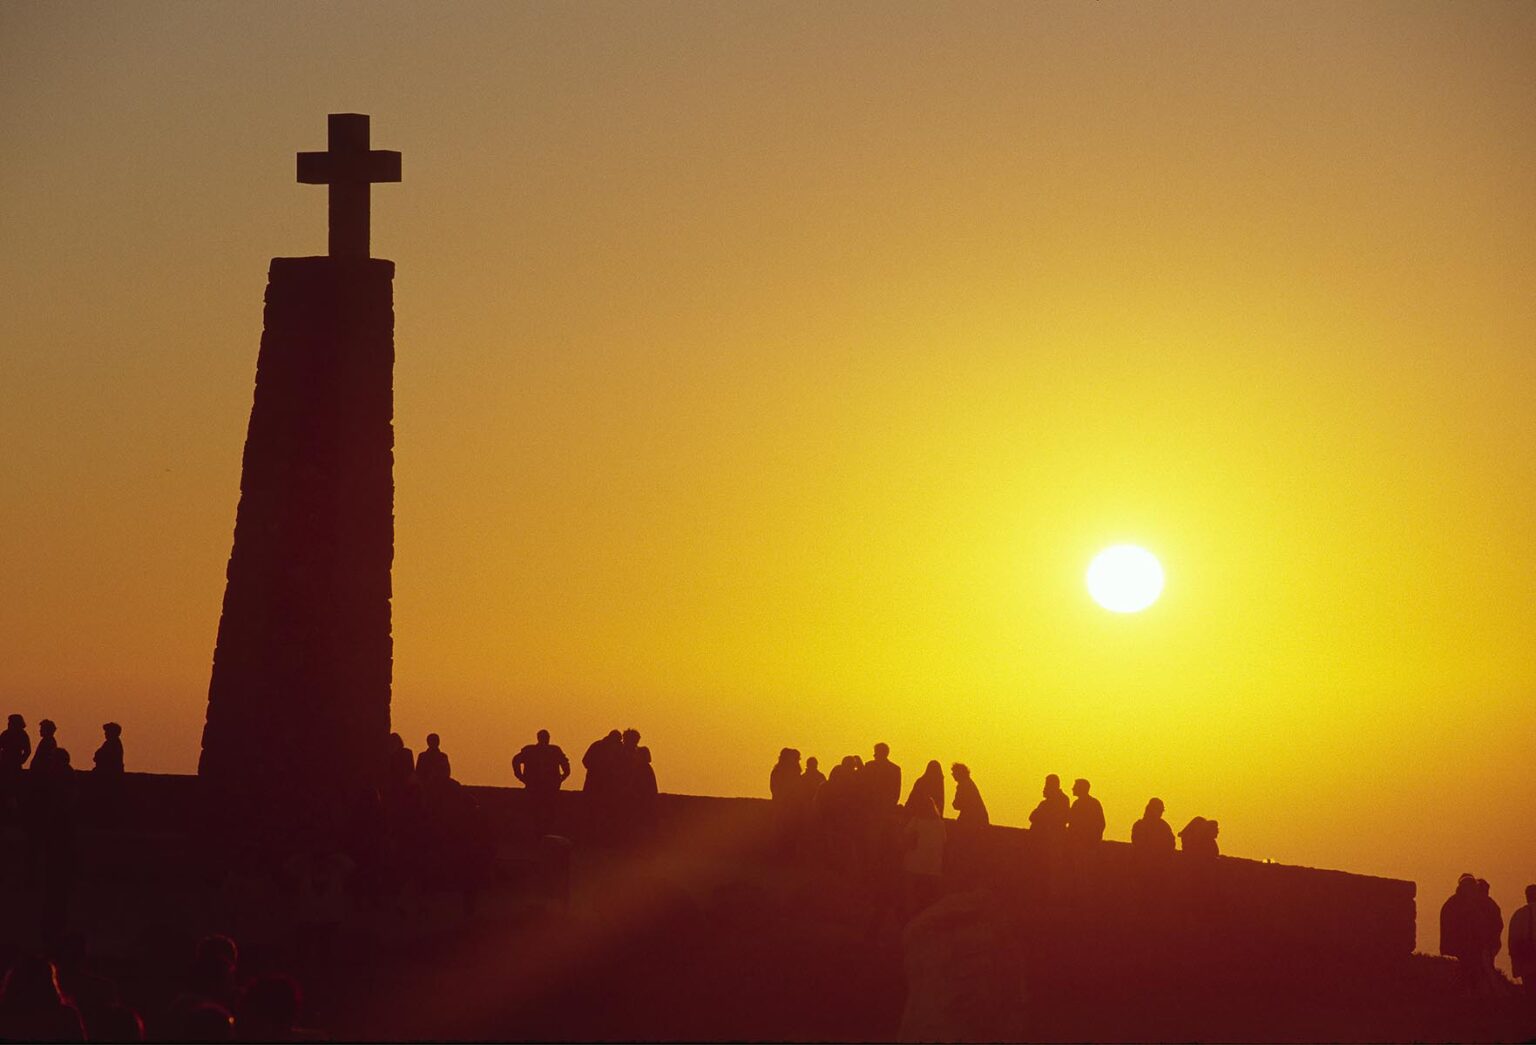 People watch the sunset below a giant cross at CABO DE ROCA, EUROPE'S most western point near LISBON - PORTUGAL